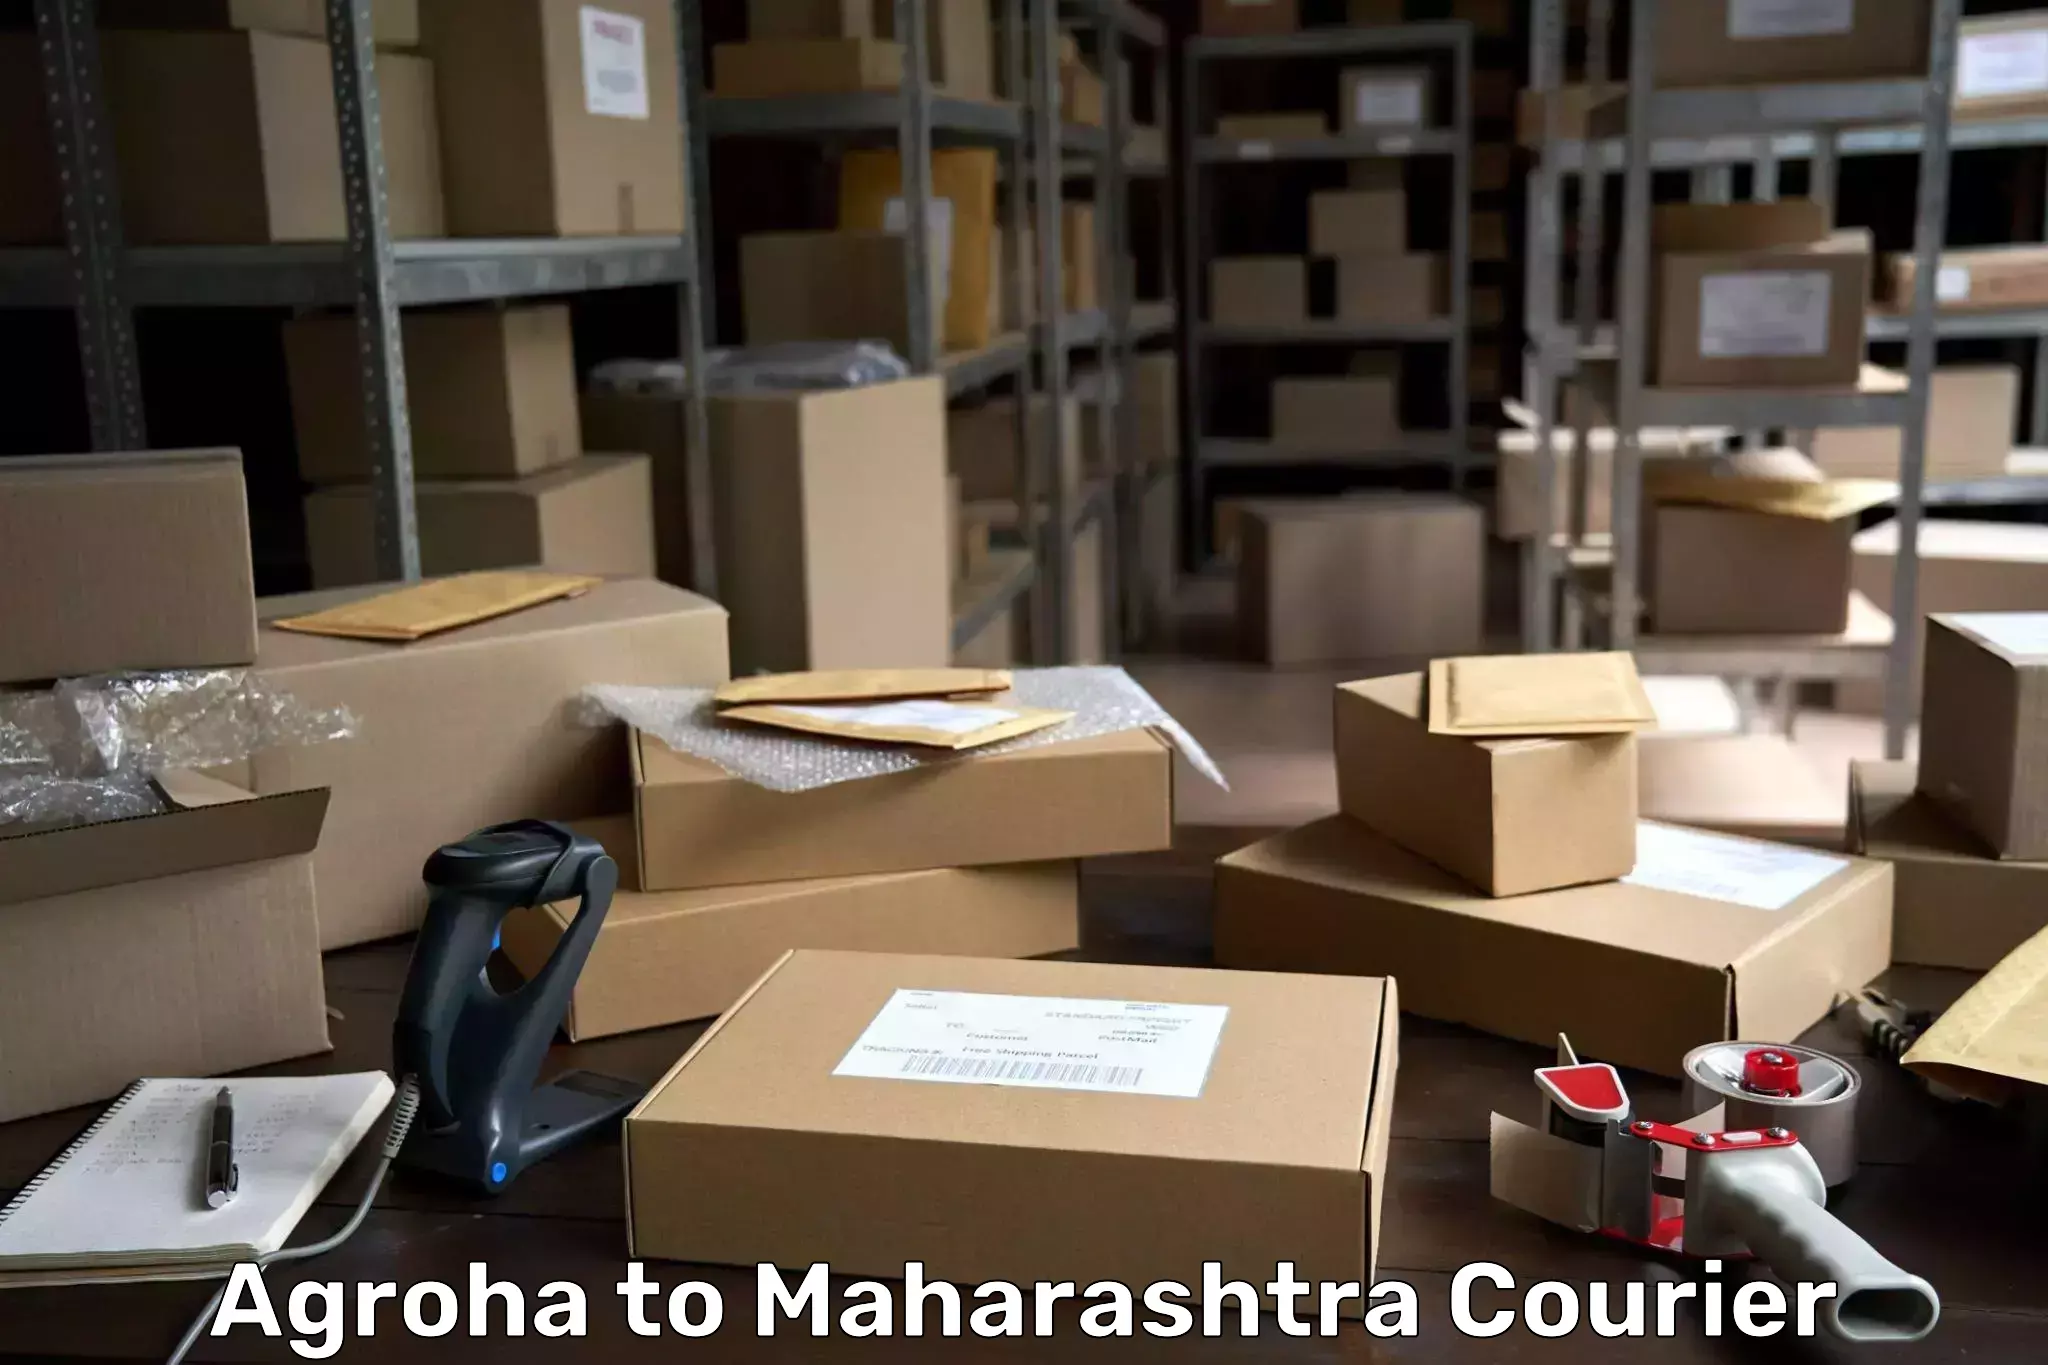 Subscription-based courier Agroha to Chandwad